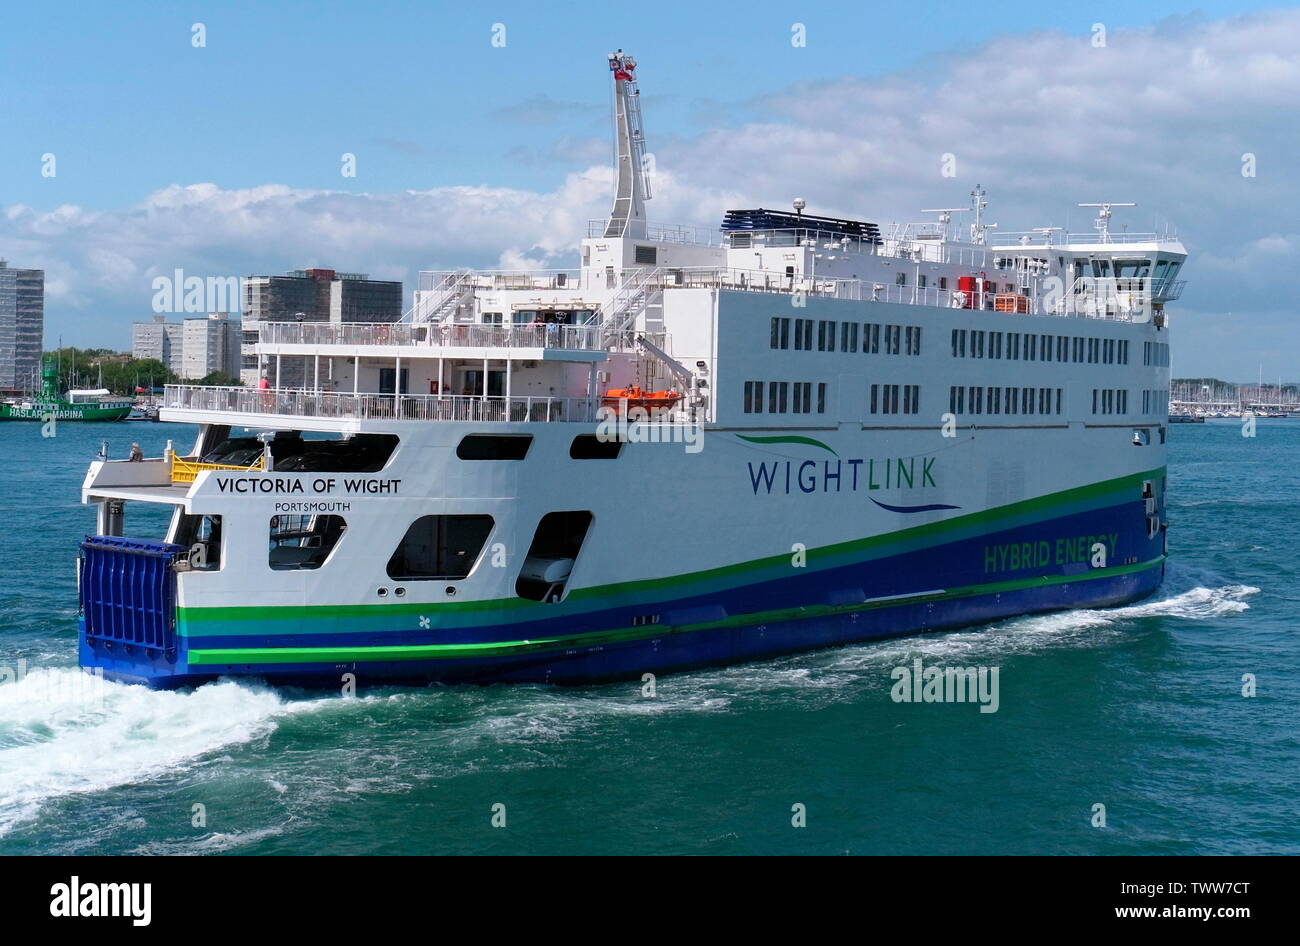 AJAXNETPHOTO. 3RD JUNE, 2019.  PORTSMOUTH, ENGLAND - PORTSMOUTH TO ISLE OF WIGHT WIGHT LINK VICTORIA OF WIGHT HYBRID ENERGY FERRY INBOUND TO THE CAMBER, OLD PORTSMOUTH. PHOTO:JONATHAN EASTLAND/AJAX REF:GXR190306 7883 Stock Photo